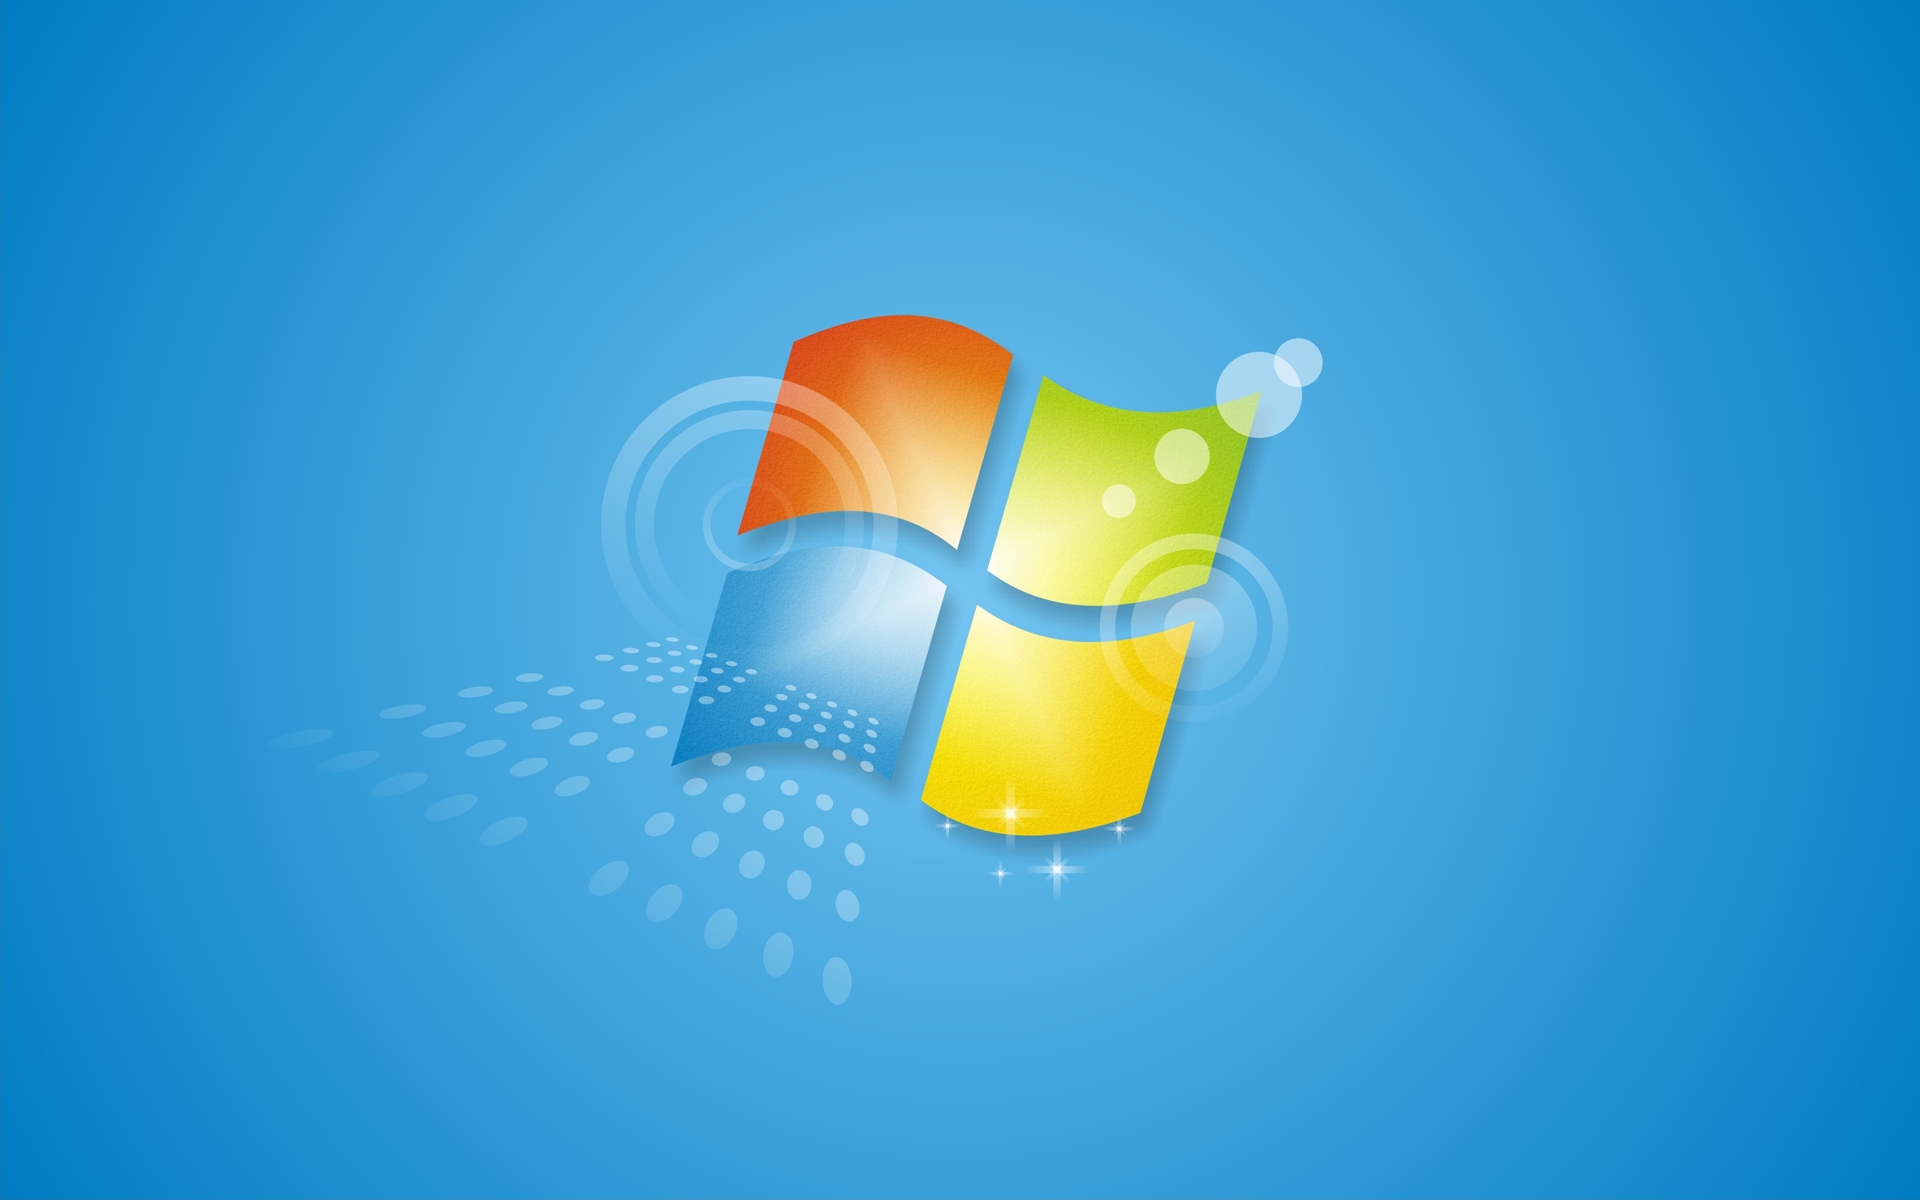 Windows 7 enters final 12 months of extended support